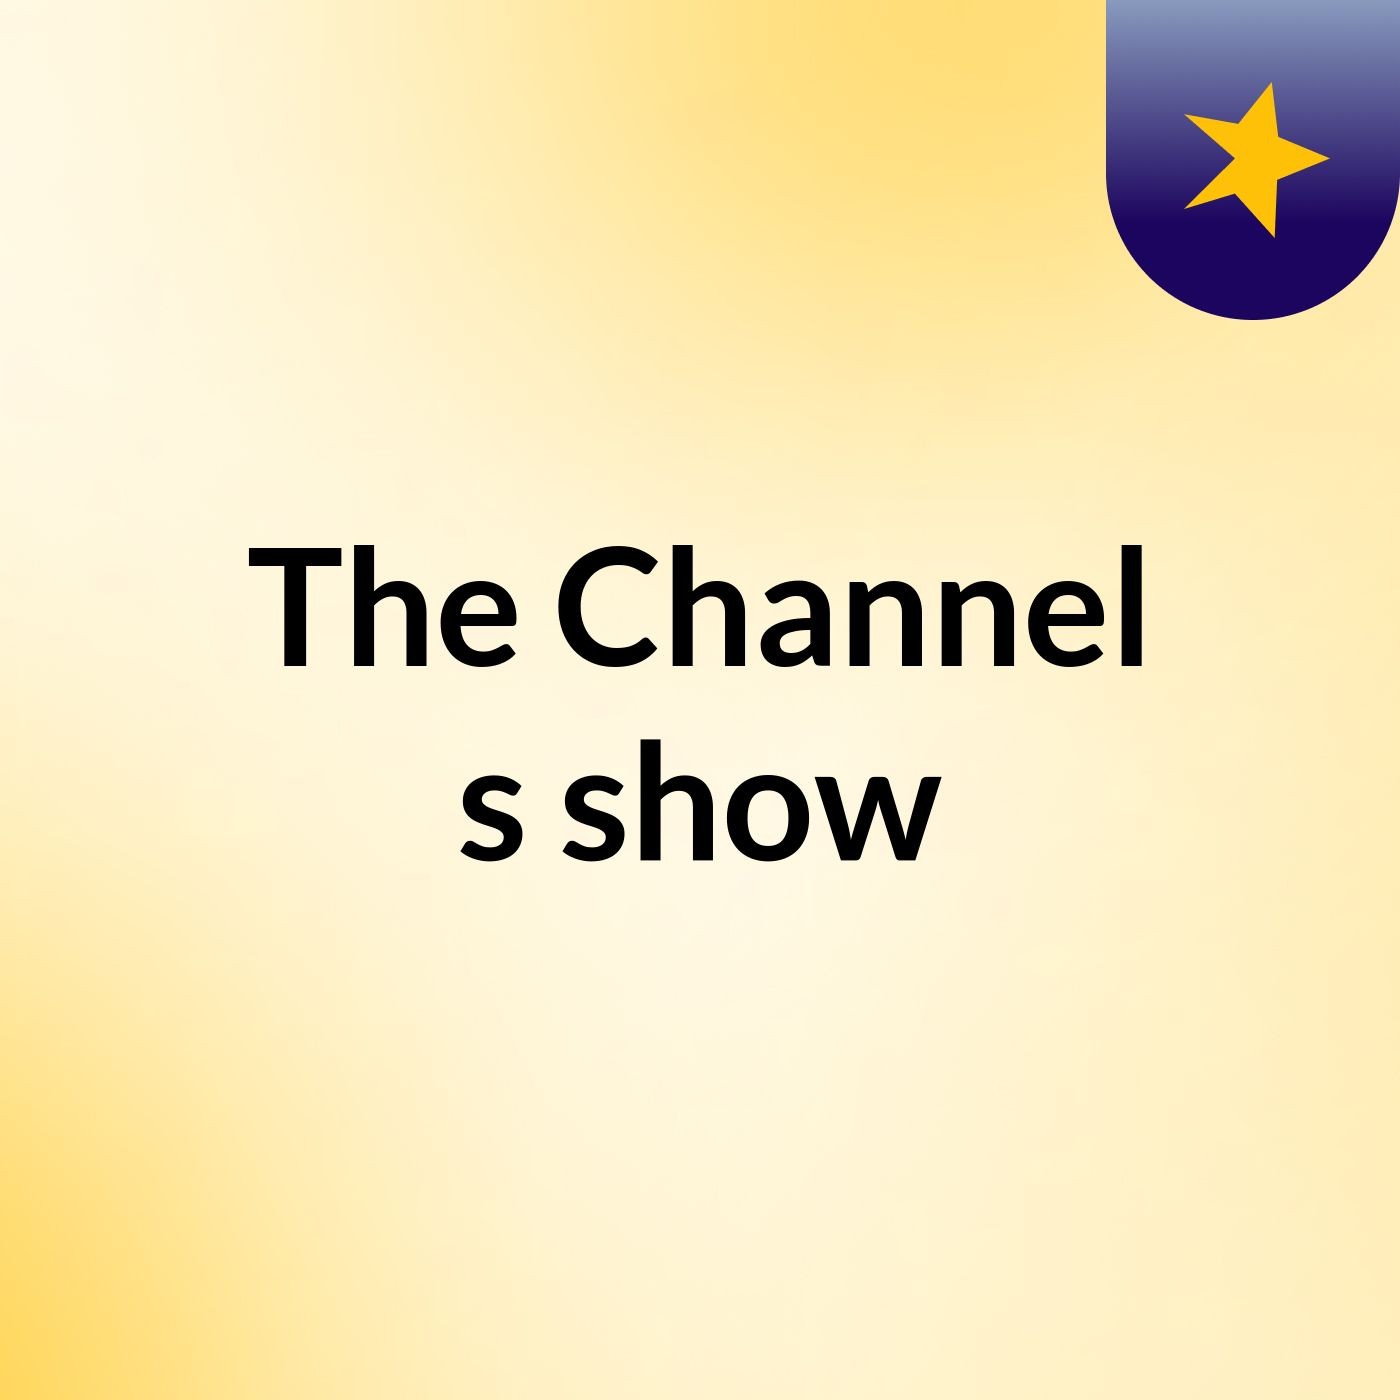 Episode 10 - The Channel's show